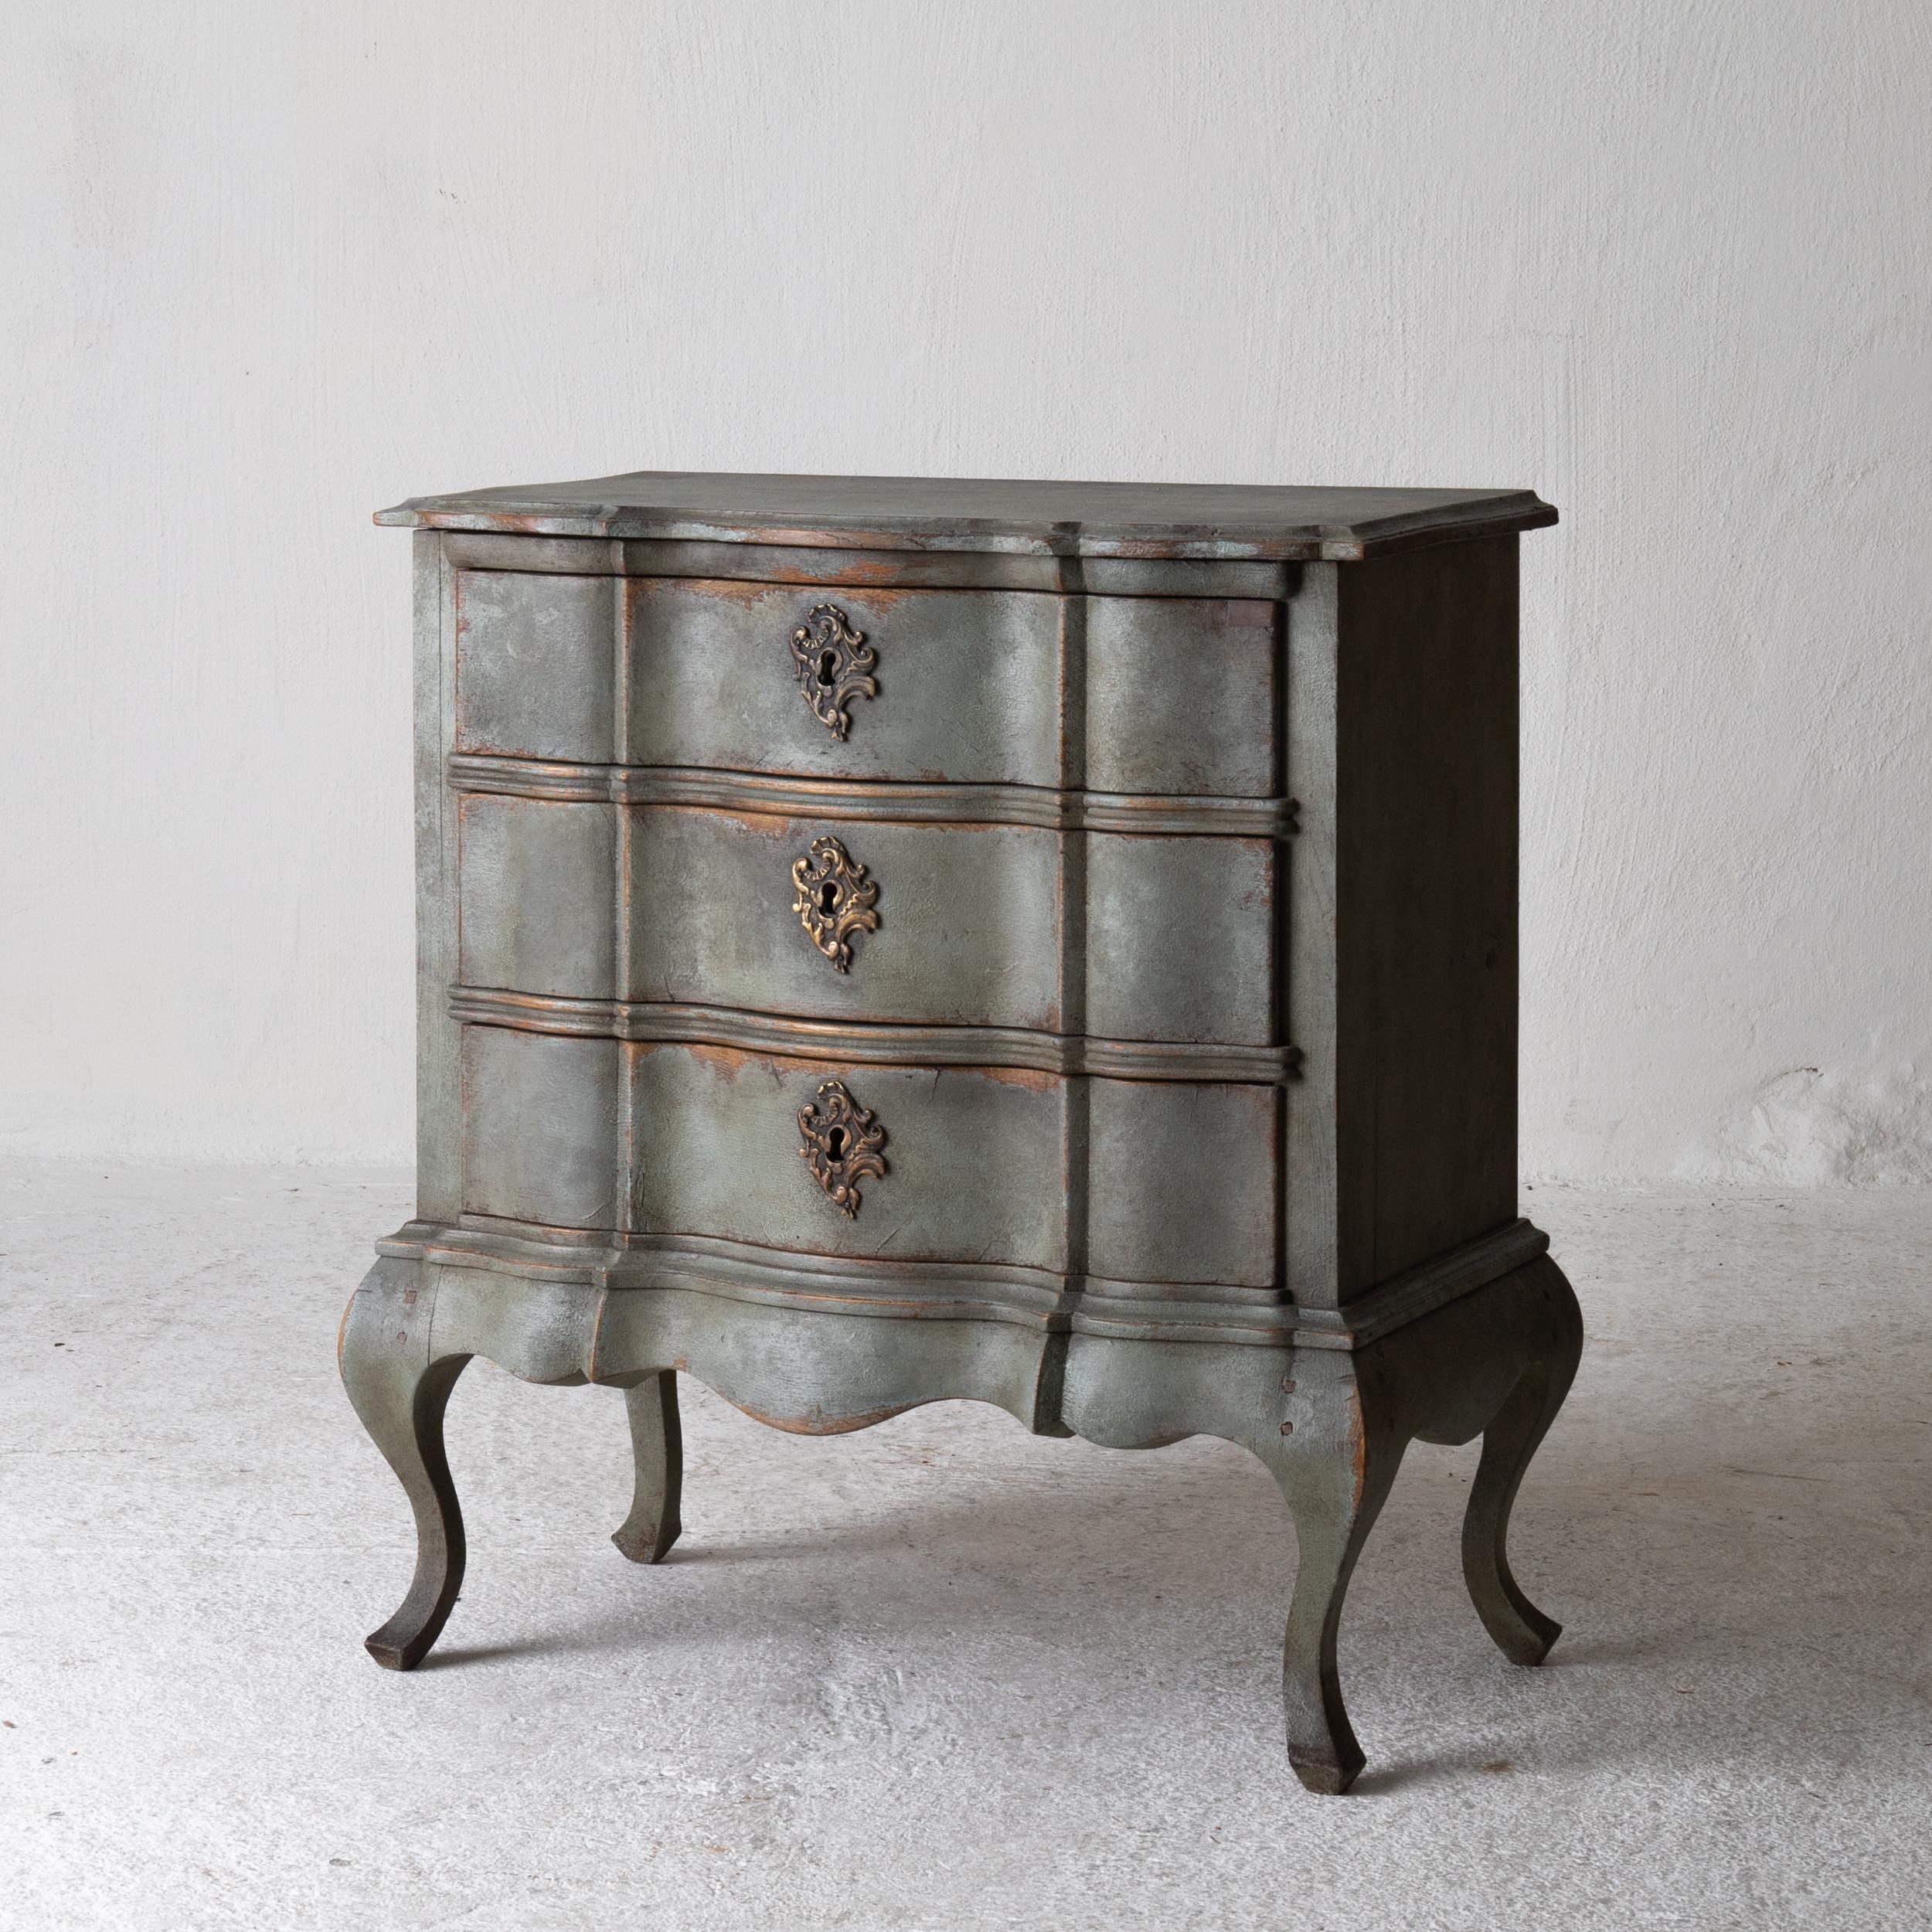 Chest of drawers Swedish Rococo 1750-1775 Greenish Blue, Sweden.
A smaller chest of drawers perfect as a nightstand or side table made during the Rococo period in Denmark. Painted in a greenish blue with stunning patina. Original brass hardware.